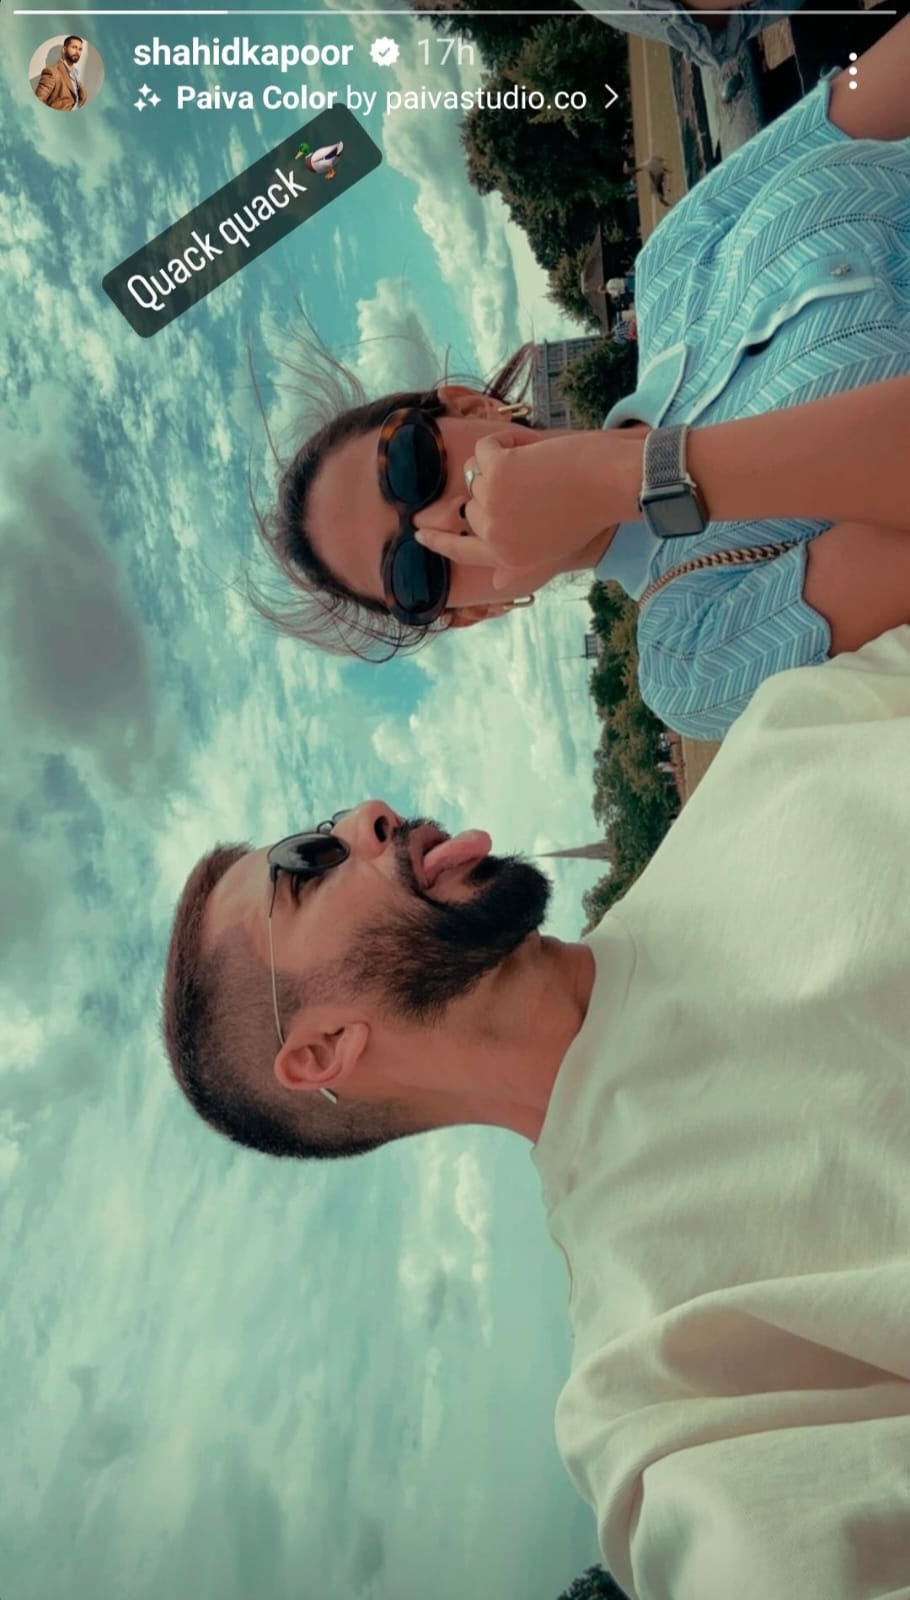 Shahid Kapoor gets all goofy around wife Mira Rajput in new vacation post